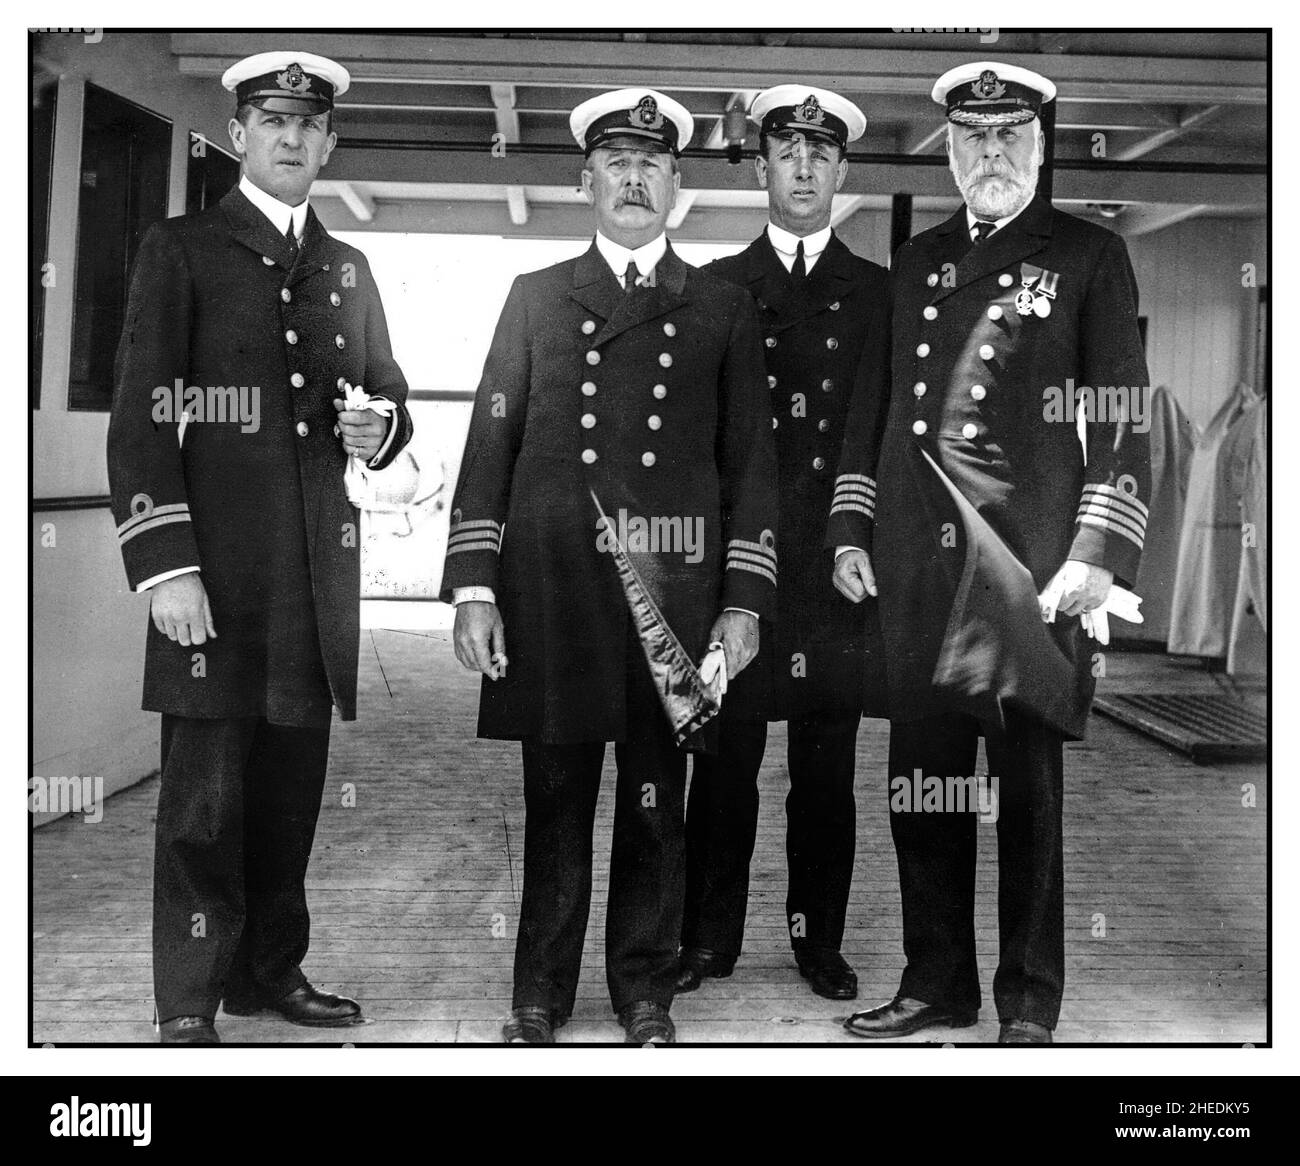 TITANIC /OLYMPIC 9th June 1911:  Officers of the White Star liner 'Olympic'  From left to right: First Officer William M Murdoch, Chief Engineer Joseph Evans, Fourth Officer David Alexander and Capt. Edward J. Smith seen on the Olympic.Captain Edward Smith most famous for his role at the helm of the Titanic, the disastrous last voyage in his successful career at sea Stock Photo